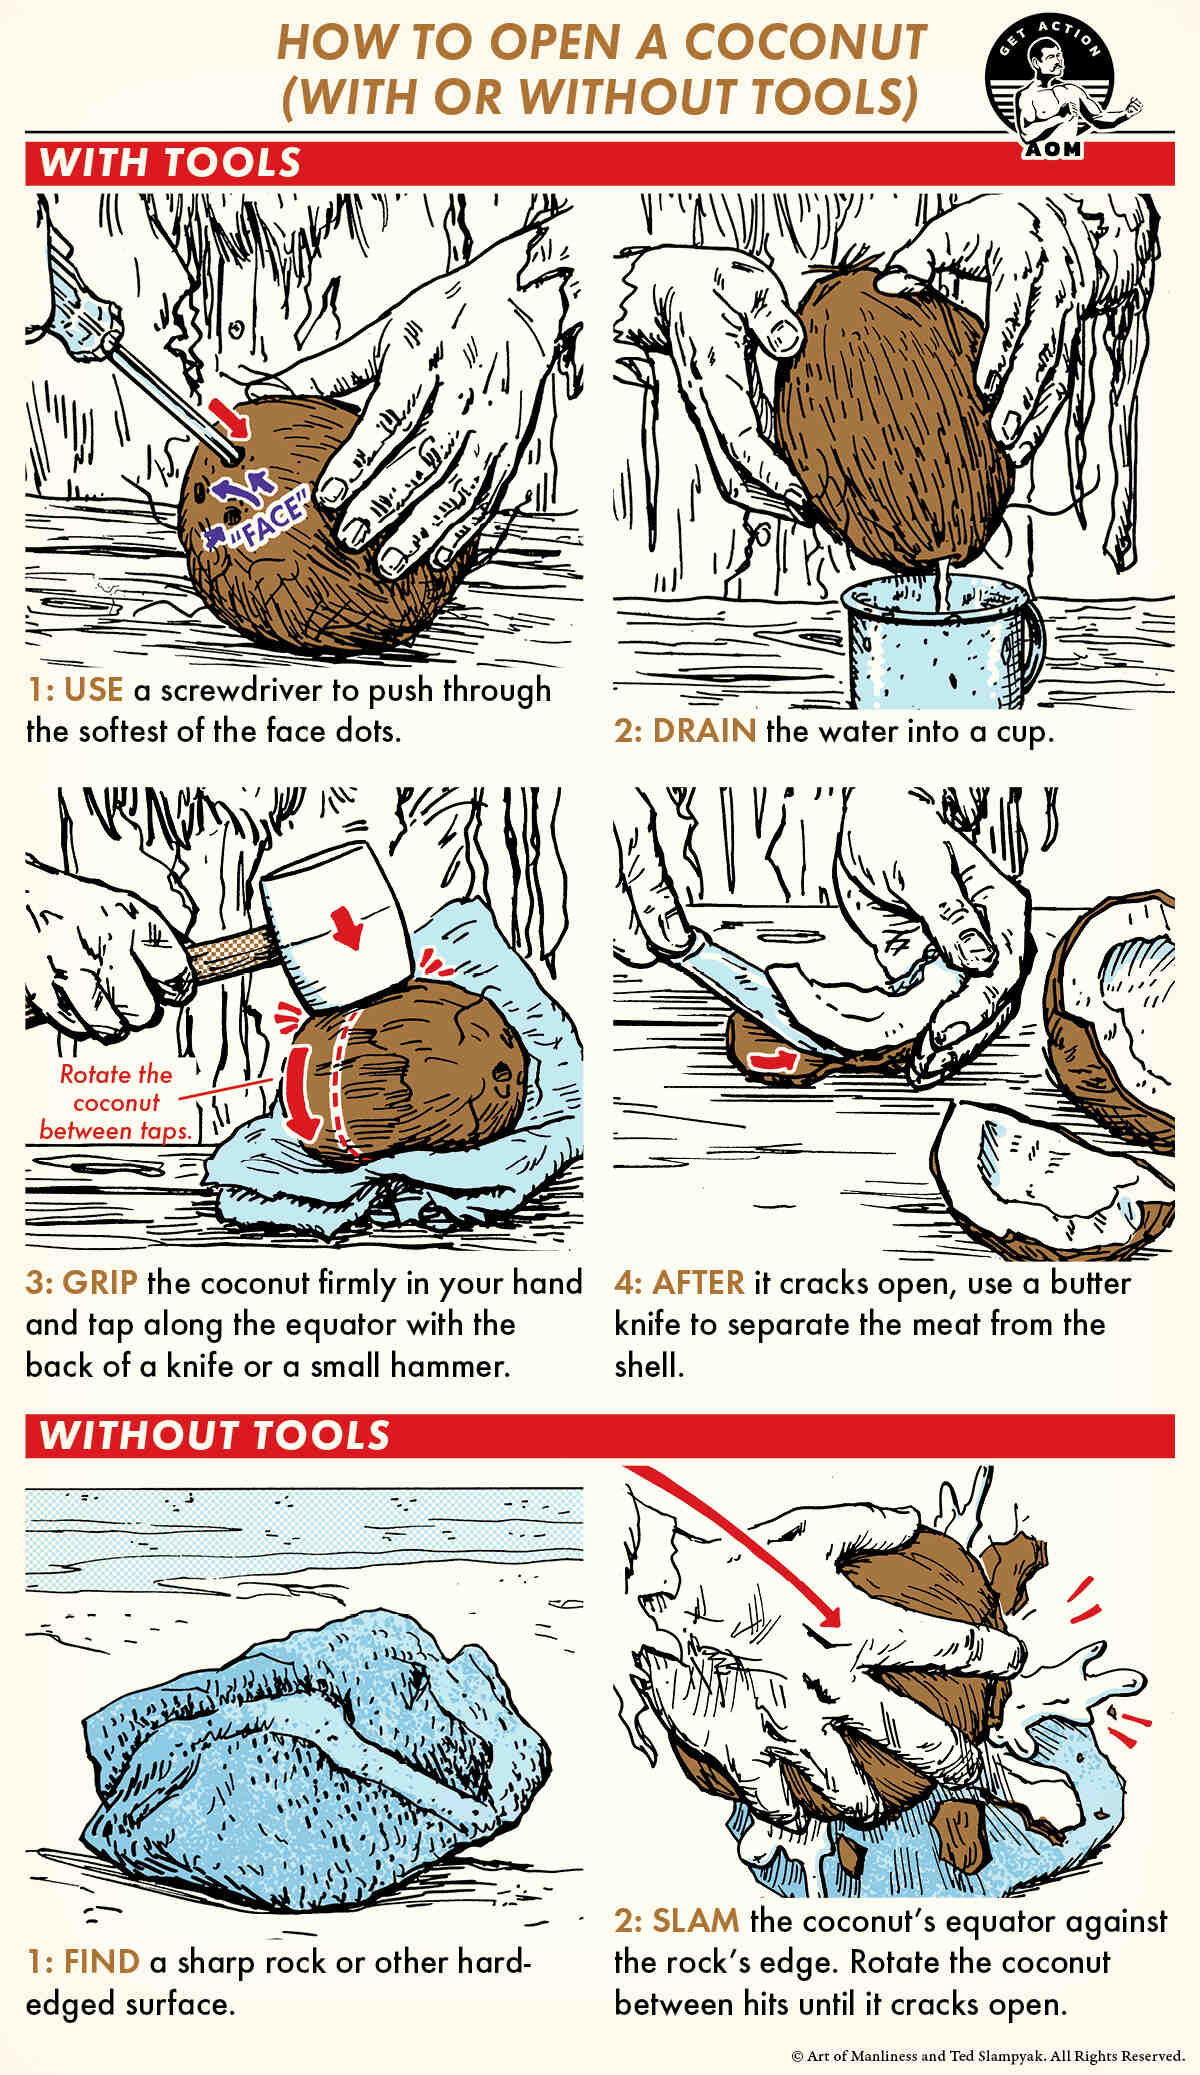 How do you open a coconut without a tool?